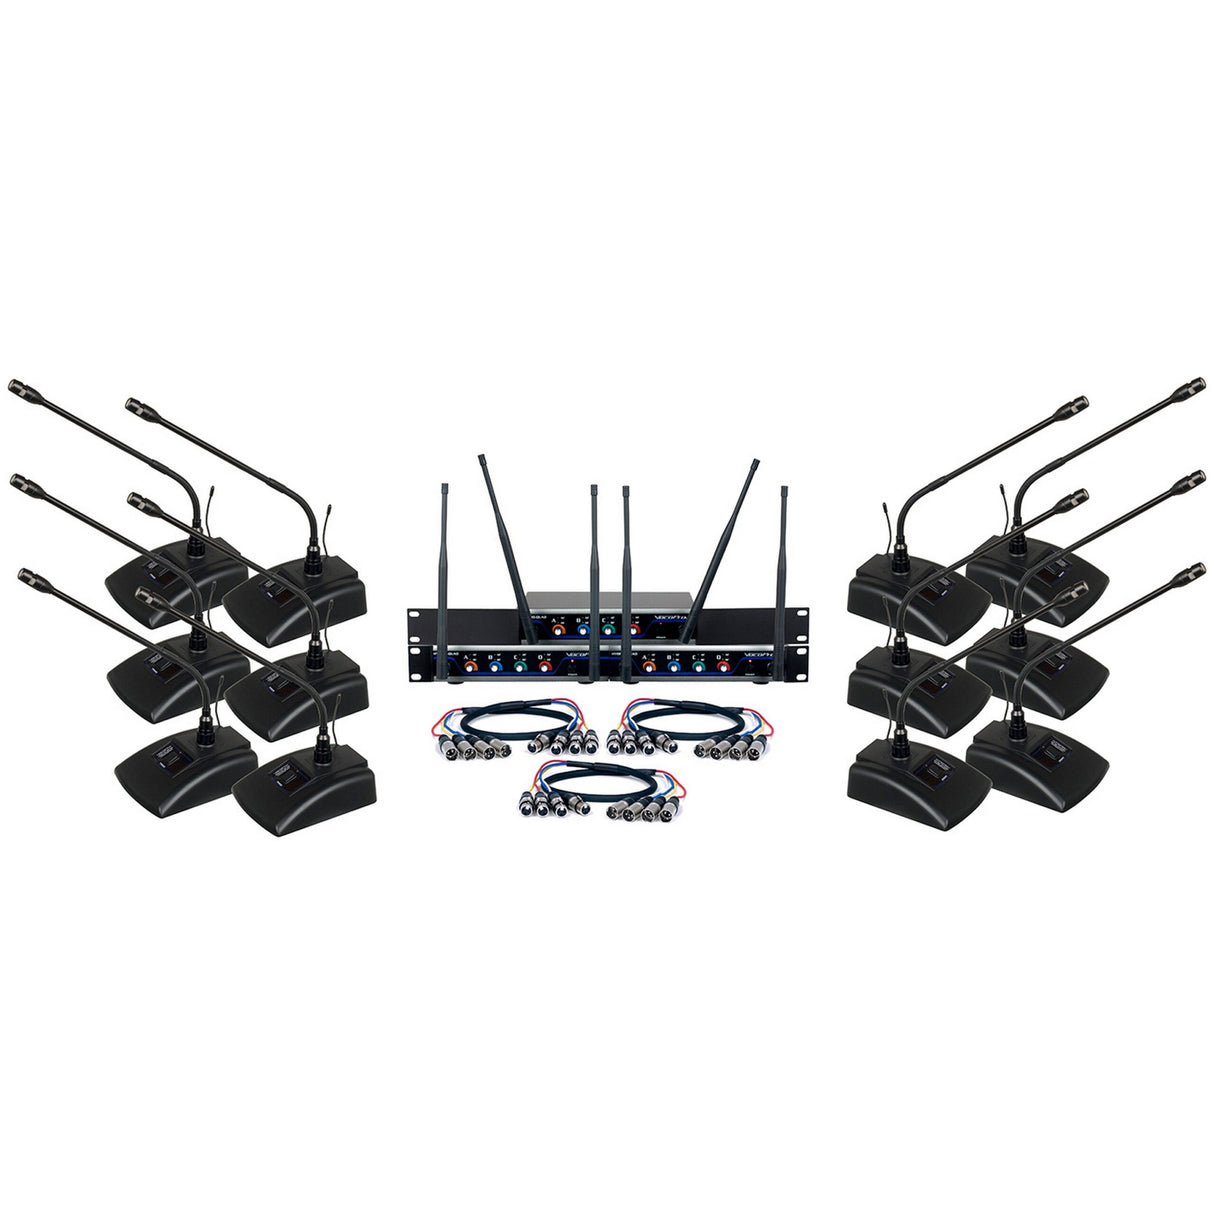 VocoPro DIGITAL-CONF-12 12-Channel UHF Wireless Conference Microphone System